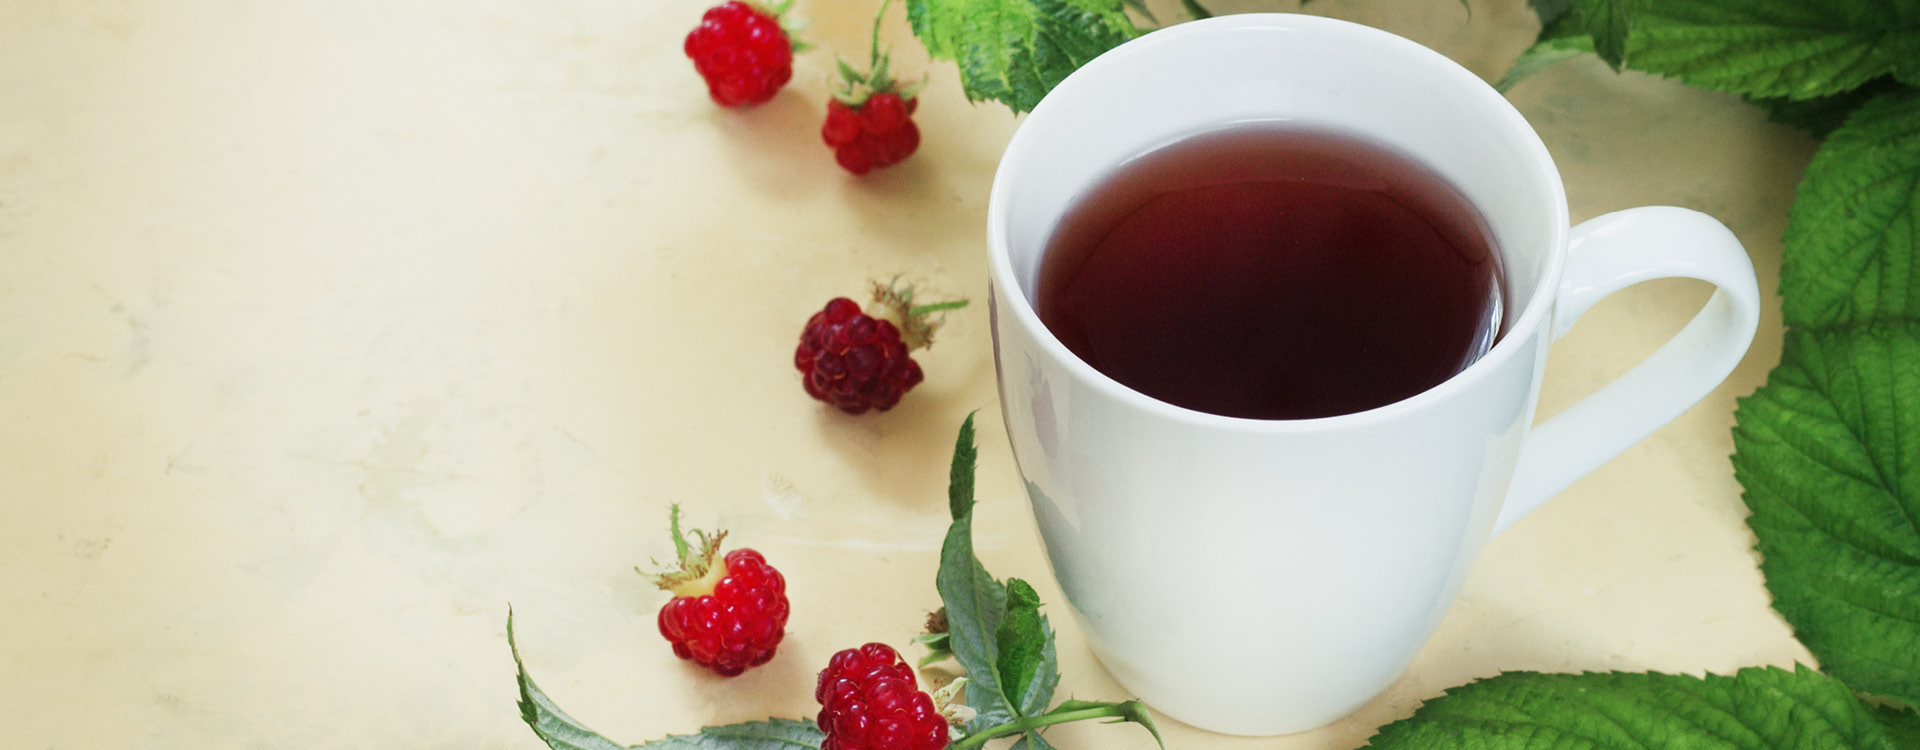 6 Red Raspberry Leaf Tea Recipes (+ How to Make Them) Article Image